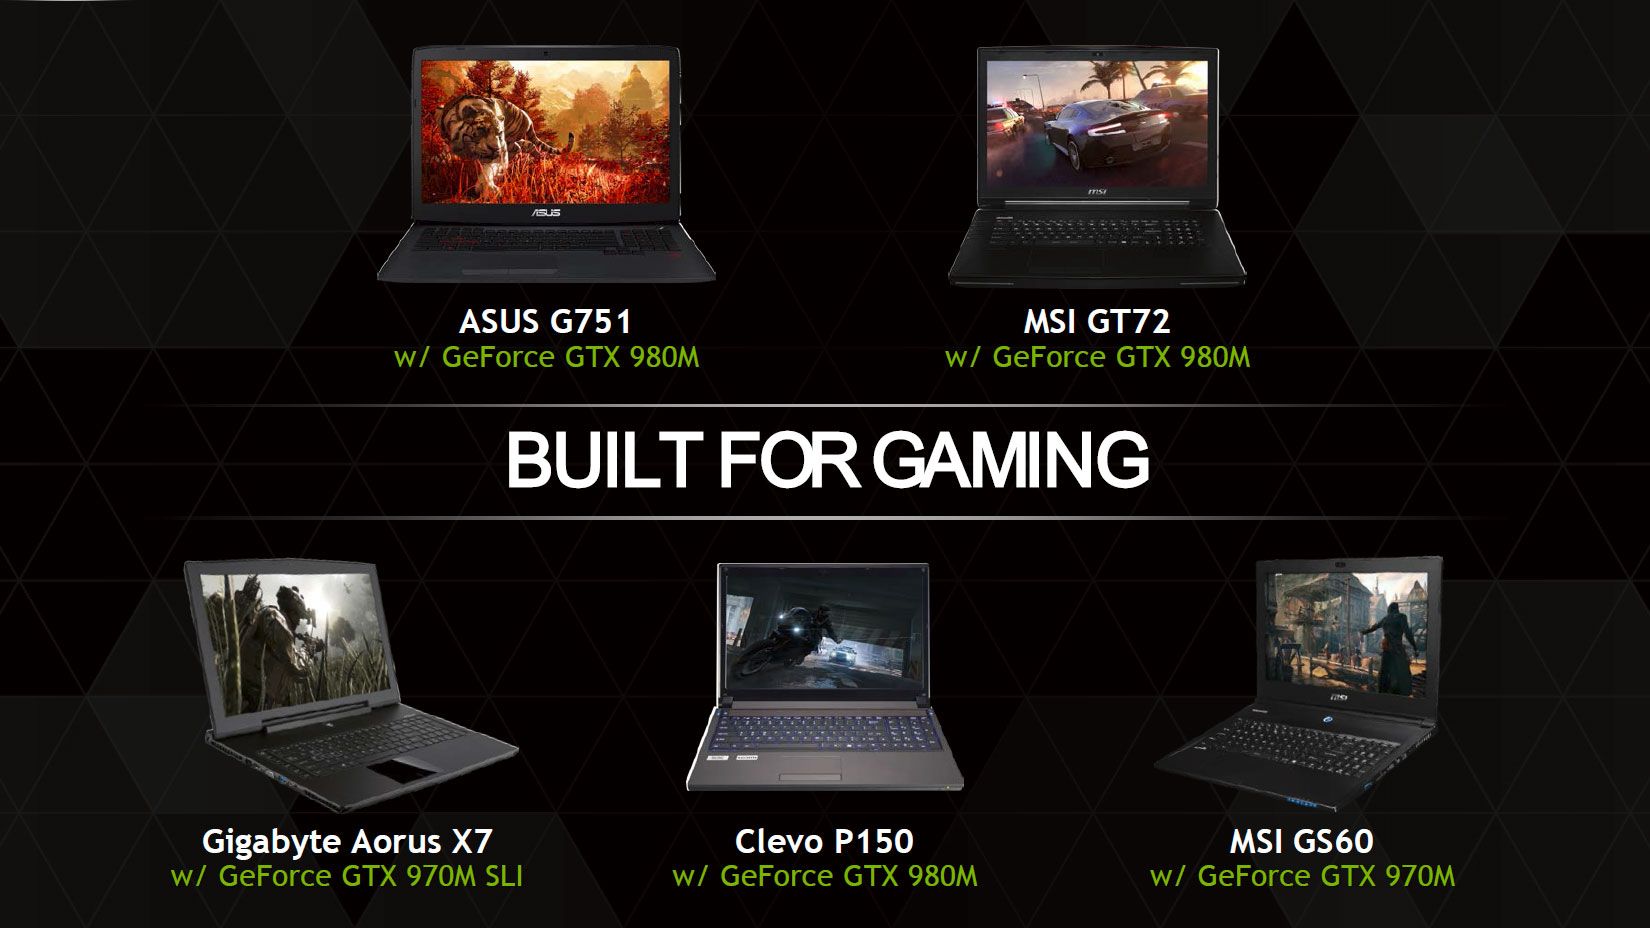 Gtx 980m And 970m Notebooks And Conclusion Nvidia Geforce Gtx 980m And Gtx 970m Mobile To The Maxwell